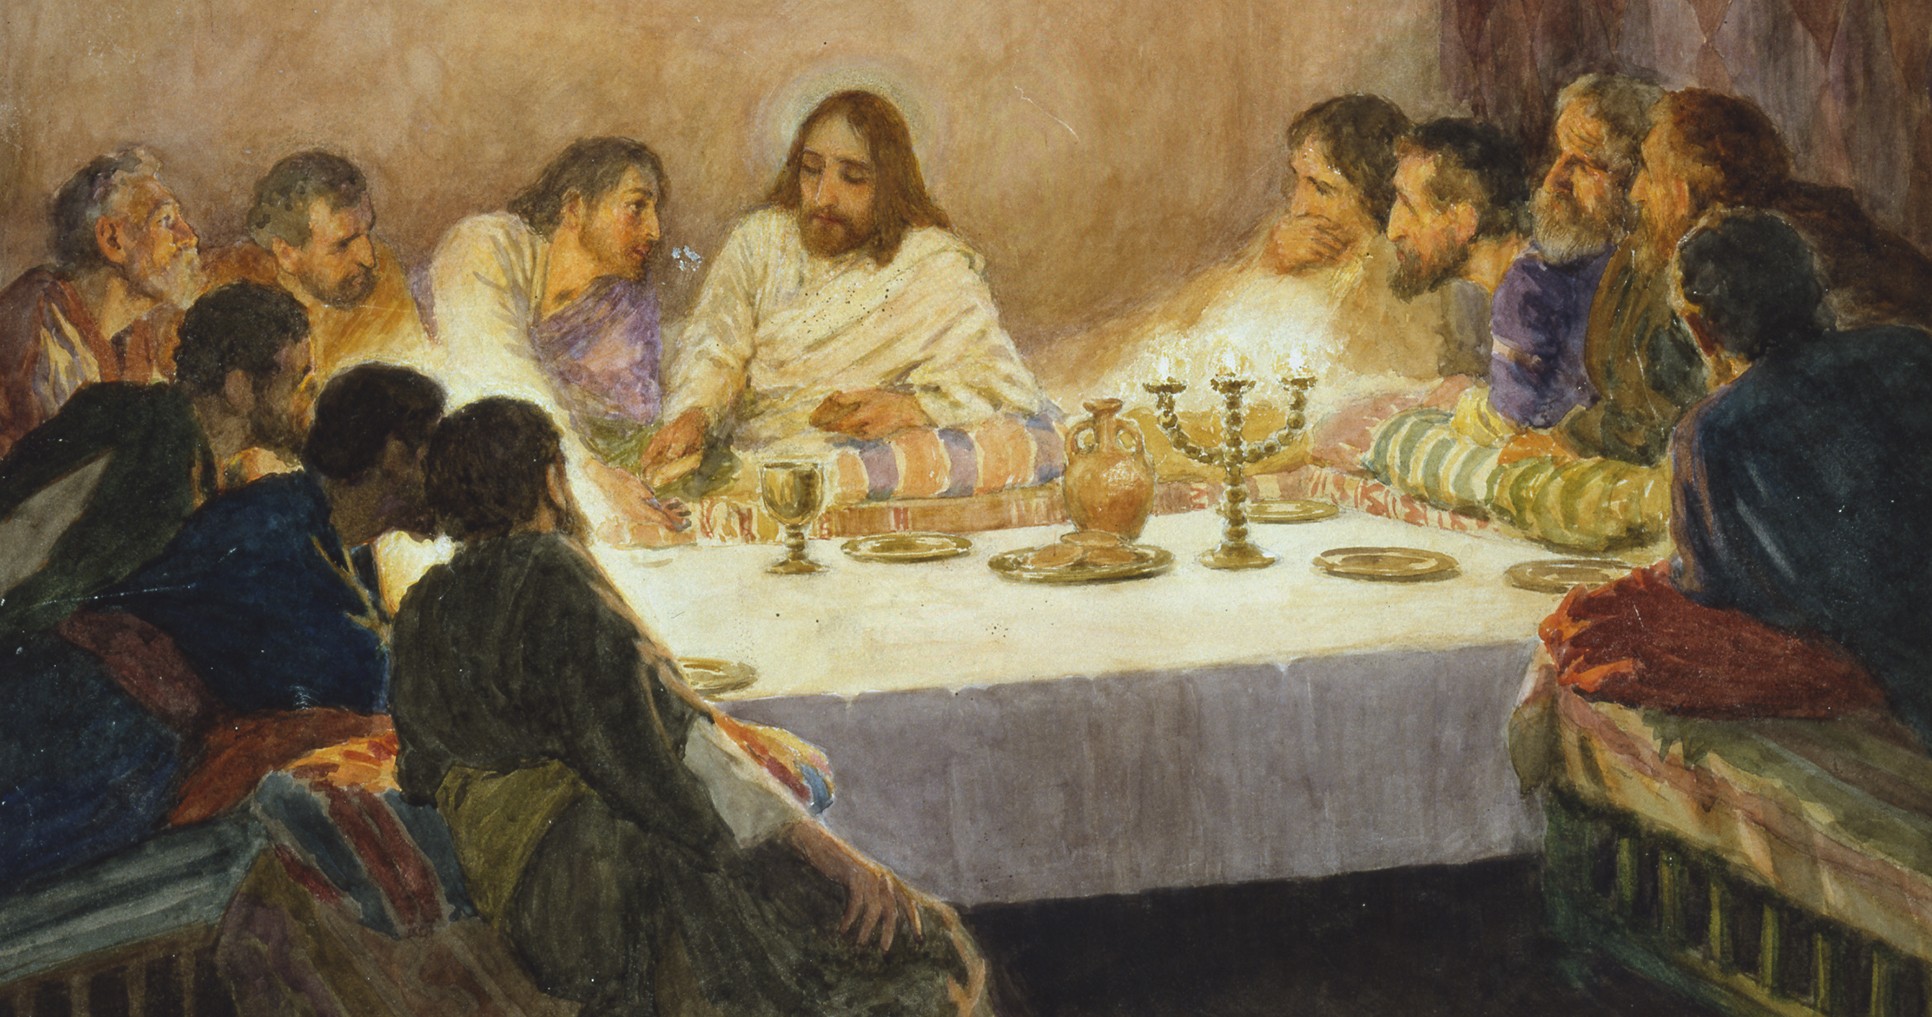 One watercolor painting.  Christ and disciples sit around table; two of them lie on "beds" which sit at right angles to main table; arched window above Christ.  Signed.